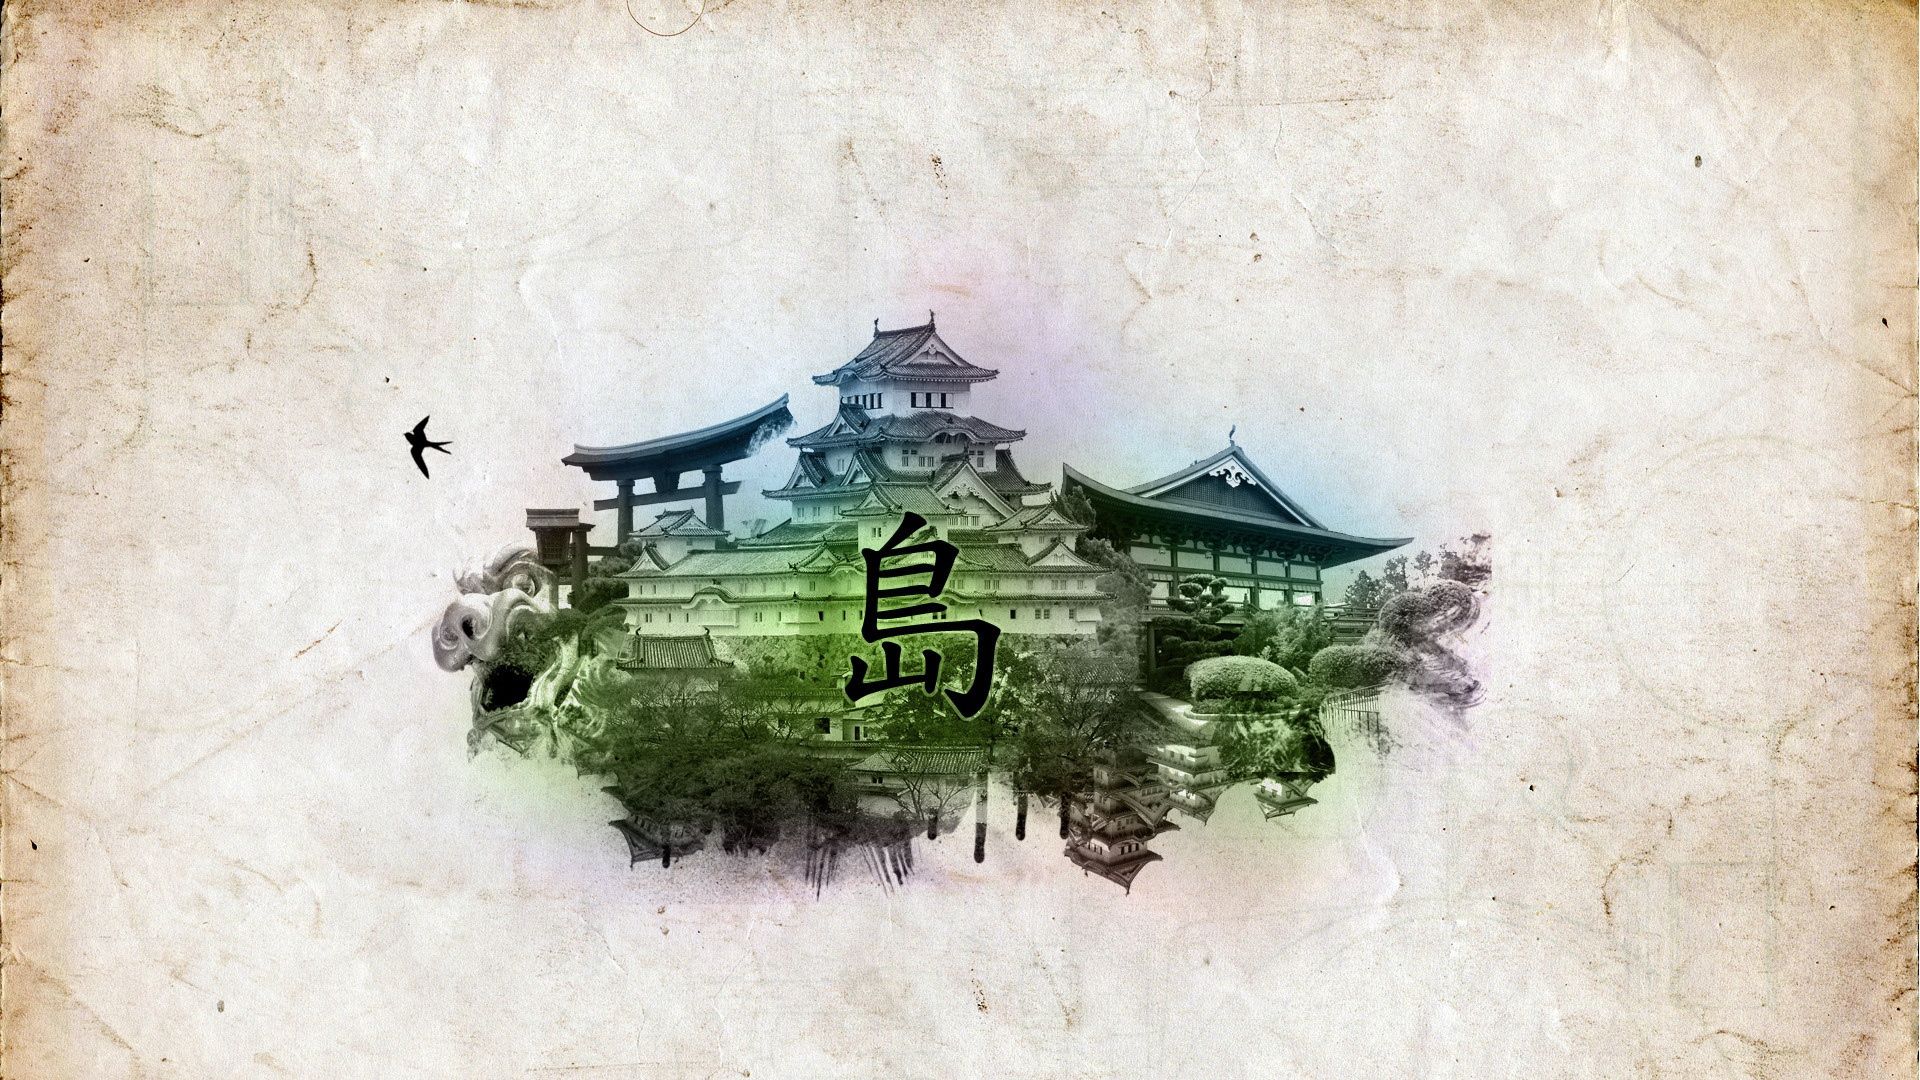 chinese wallpaper background